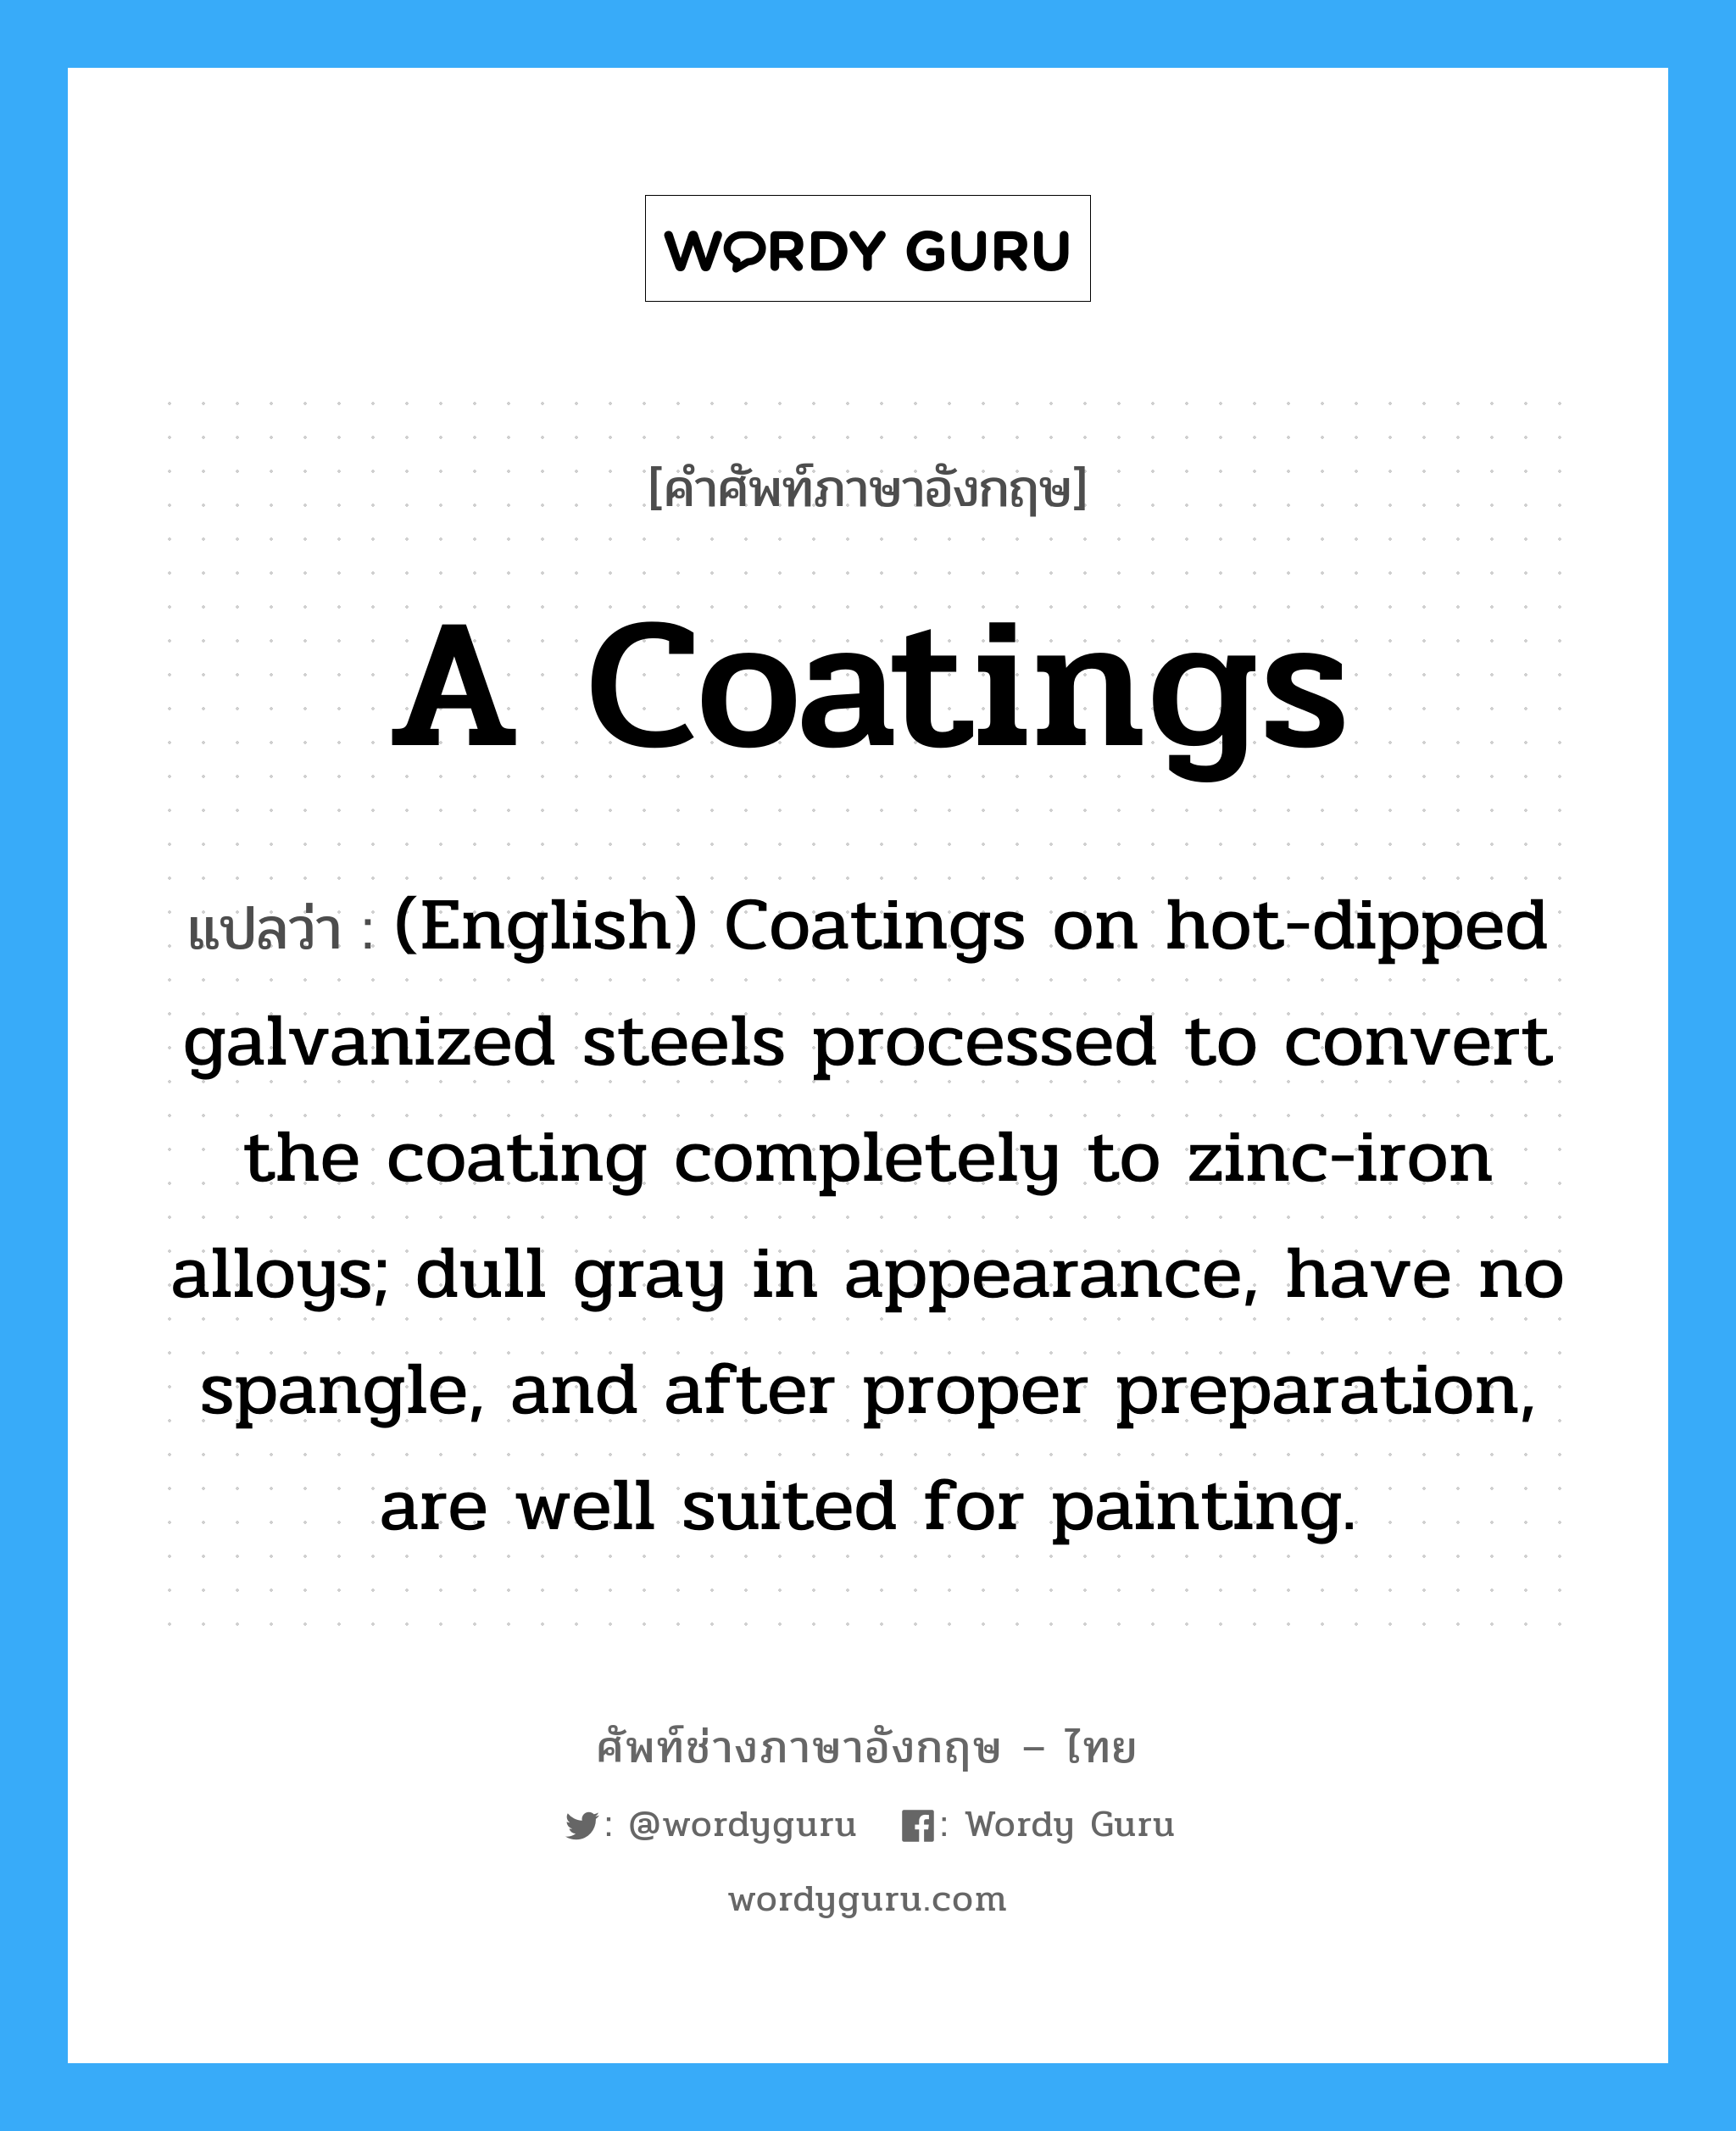 A Coatings แปลว่า?, คำศัพท์ช่างภาษาอังกฤษ - ไทย A Coatings คำศัพท์ภาษาอังกฤษ A Coatings แปลว่า (English) Coatings on hot-dipped galvanized steels processed to convert the coating completely to zinc-iron alloys; dull gray in appearance, have no spangle, and after proper preparation, are well suited for painting.